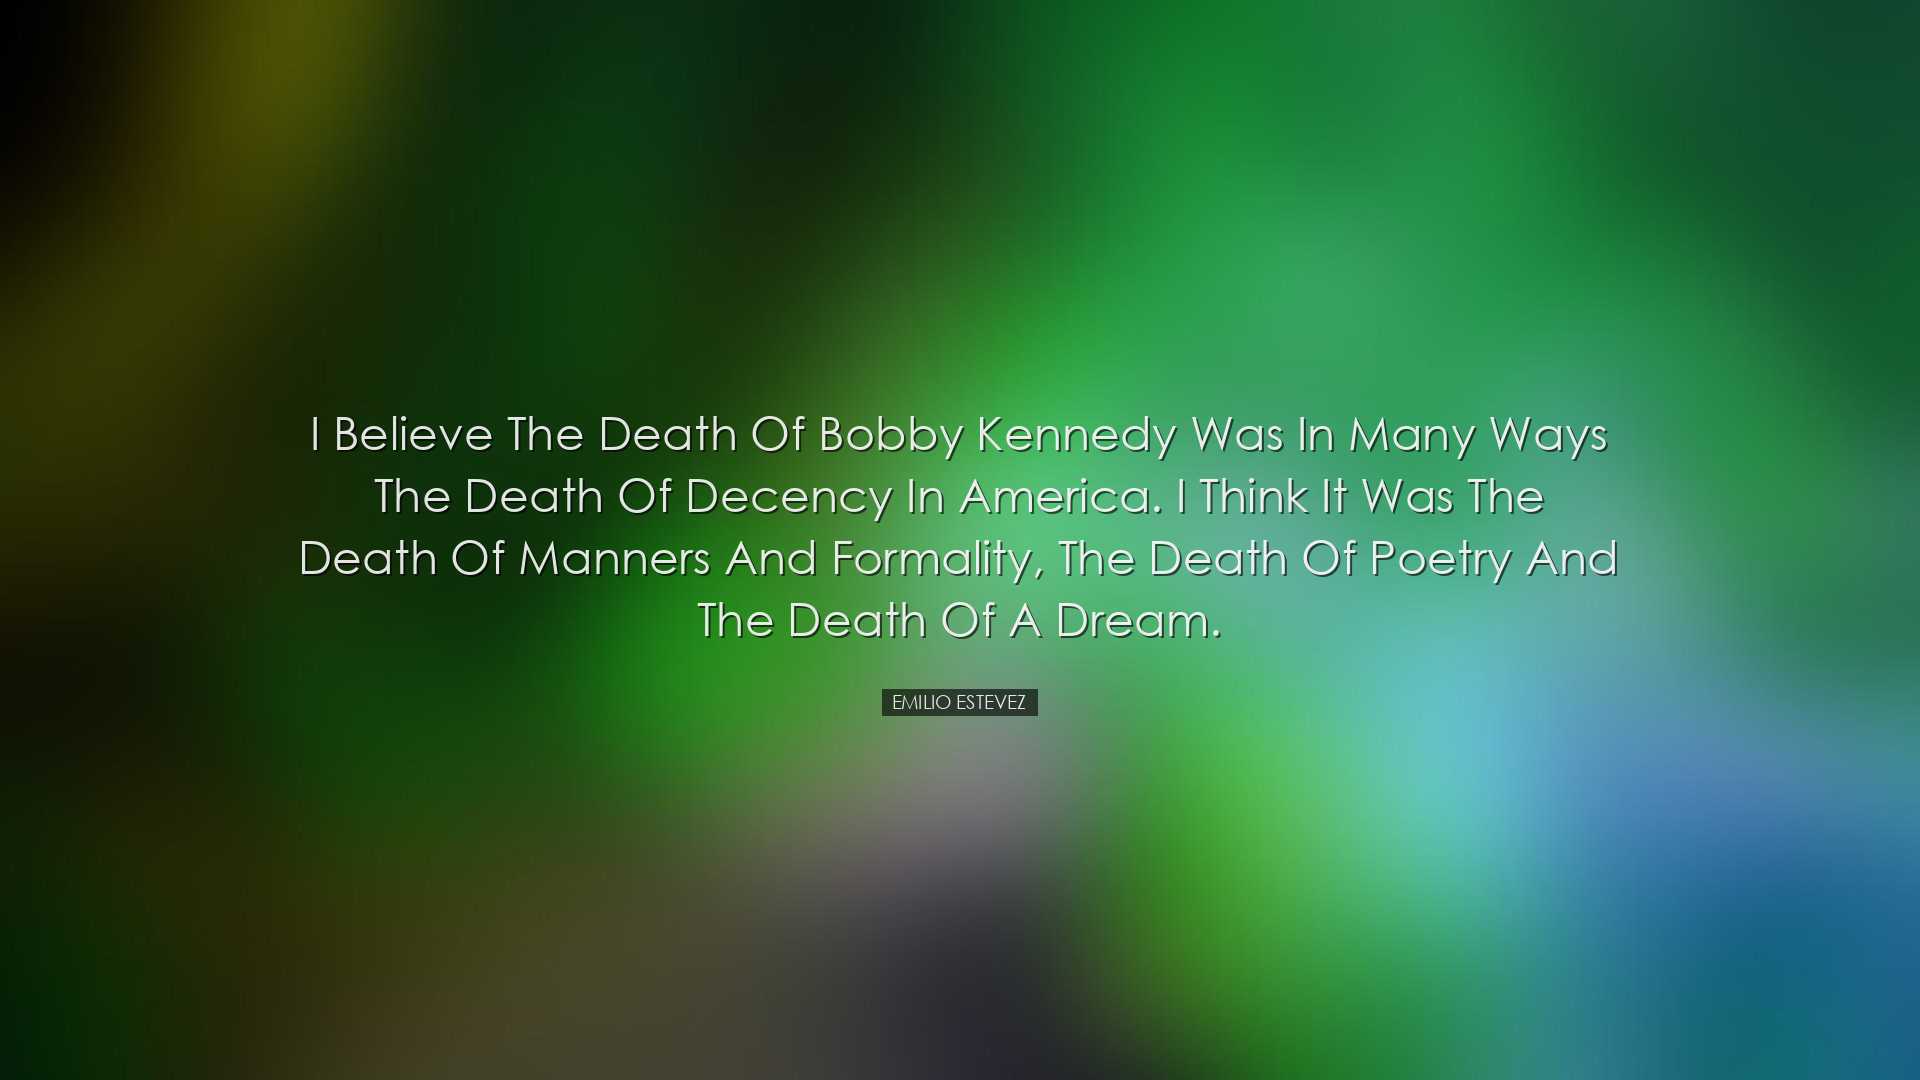 I believe the death of Bobby Kennedy was in many ways the death of